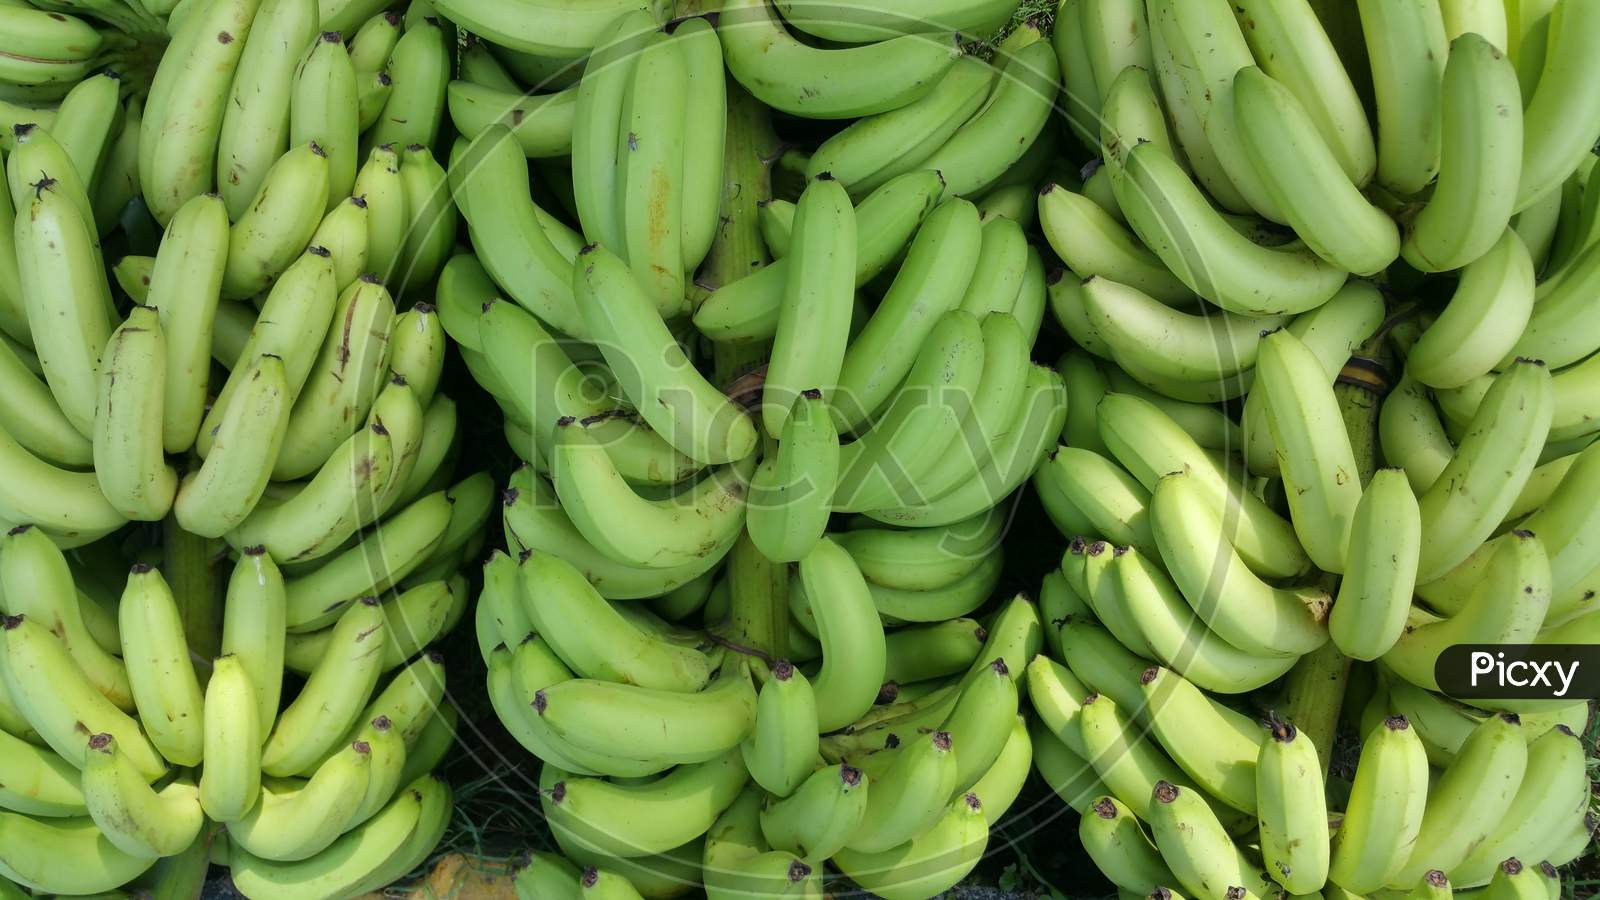 Close up of green bananas in a market